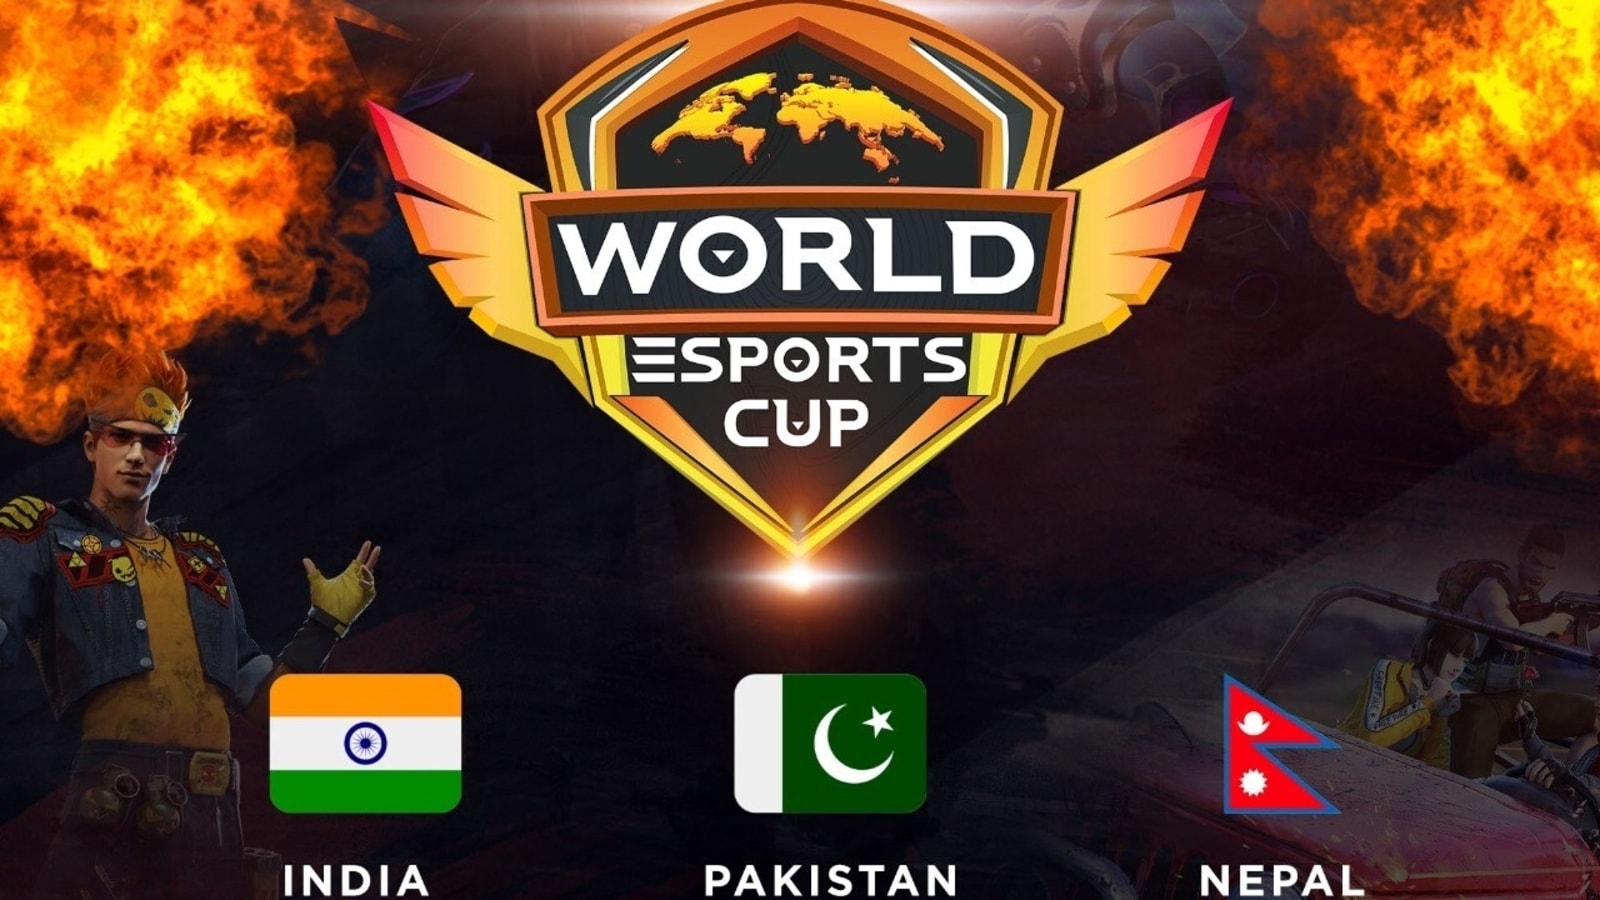 World Esports Cup to see gamers from India, Pakistan and Nepal compete